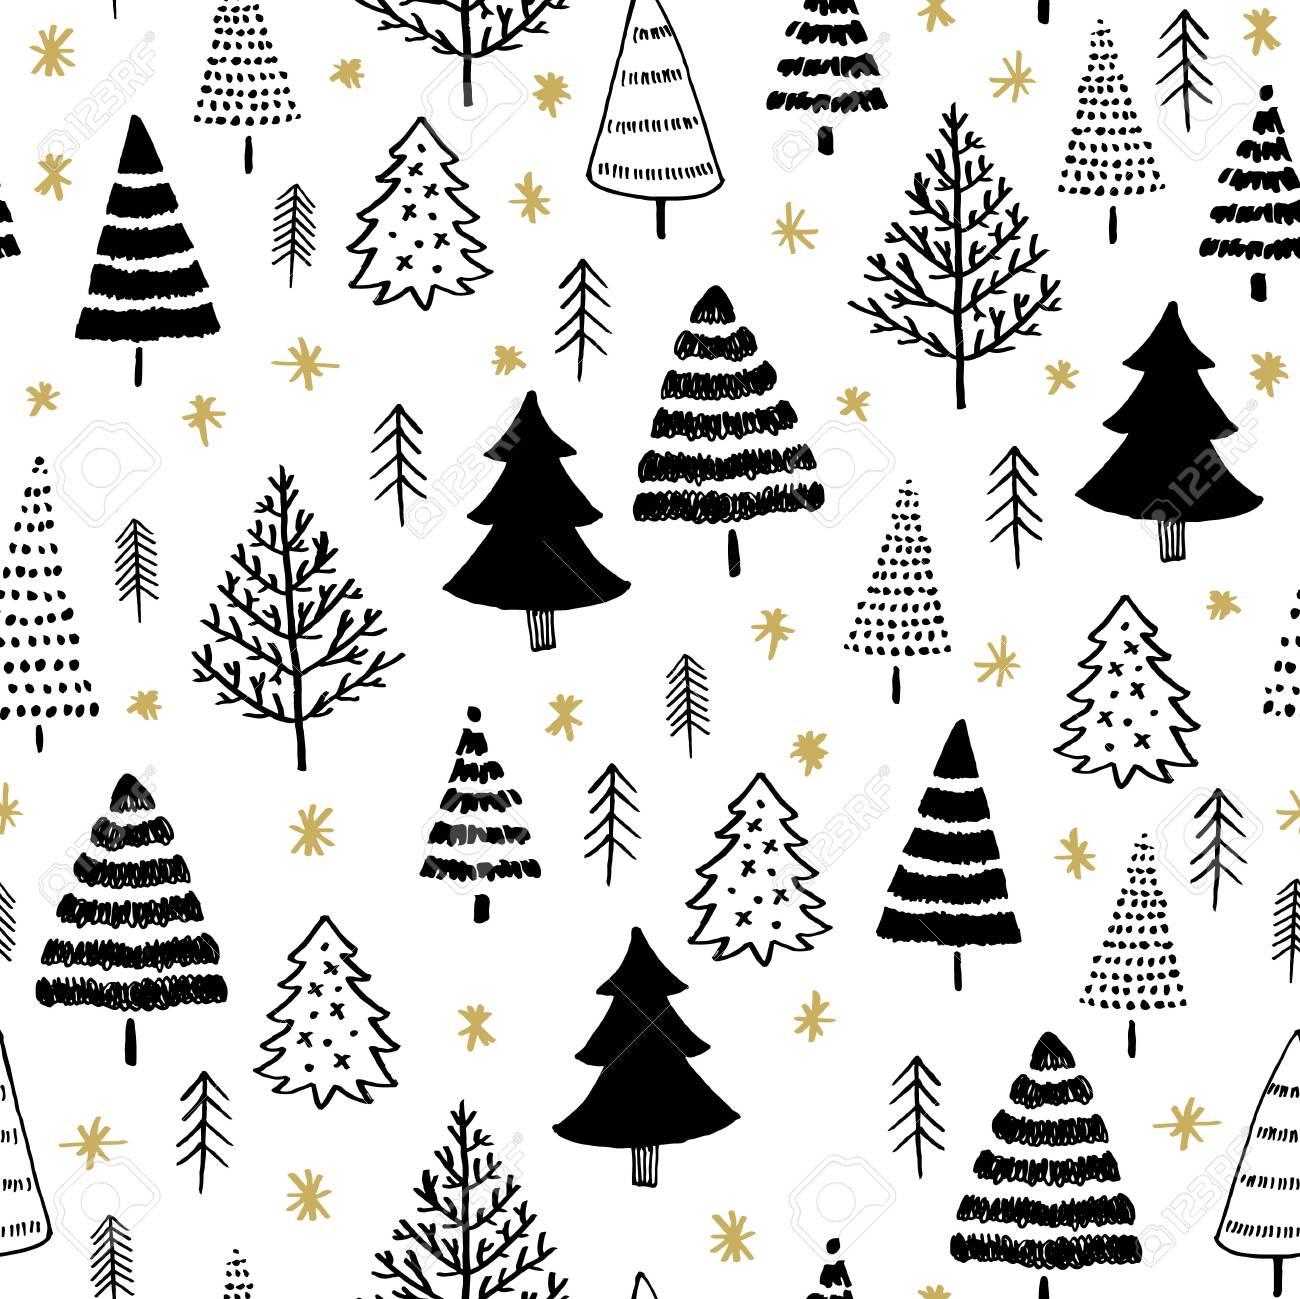 Winter Graphic Seamless Pattern With Christmas Trees In Black On